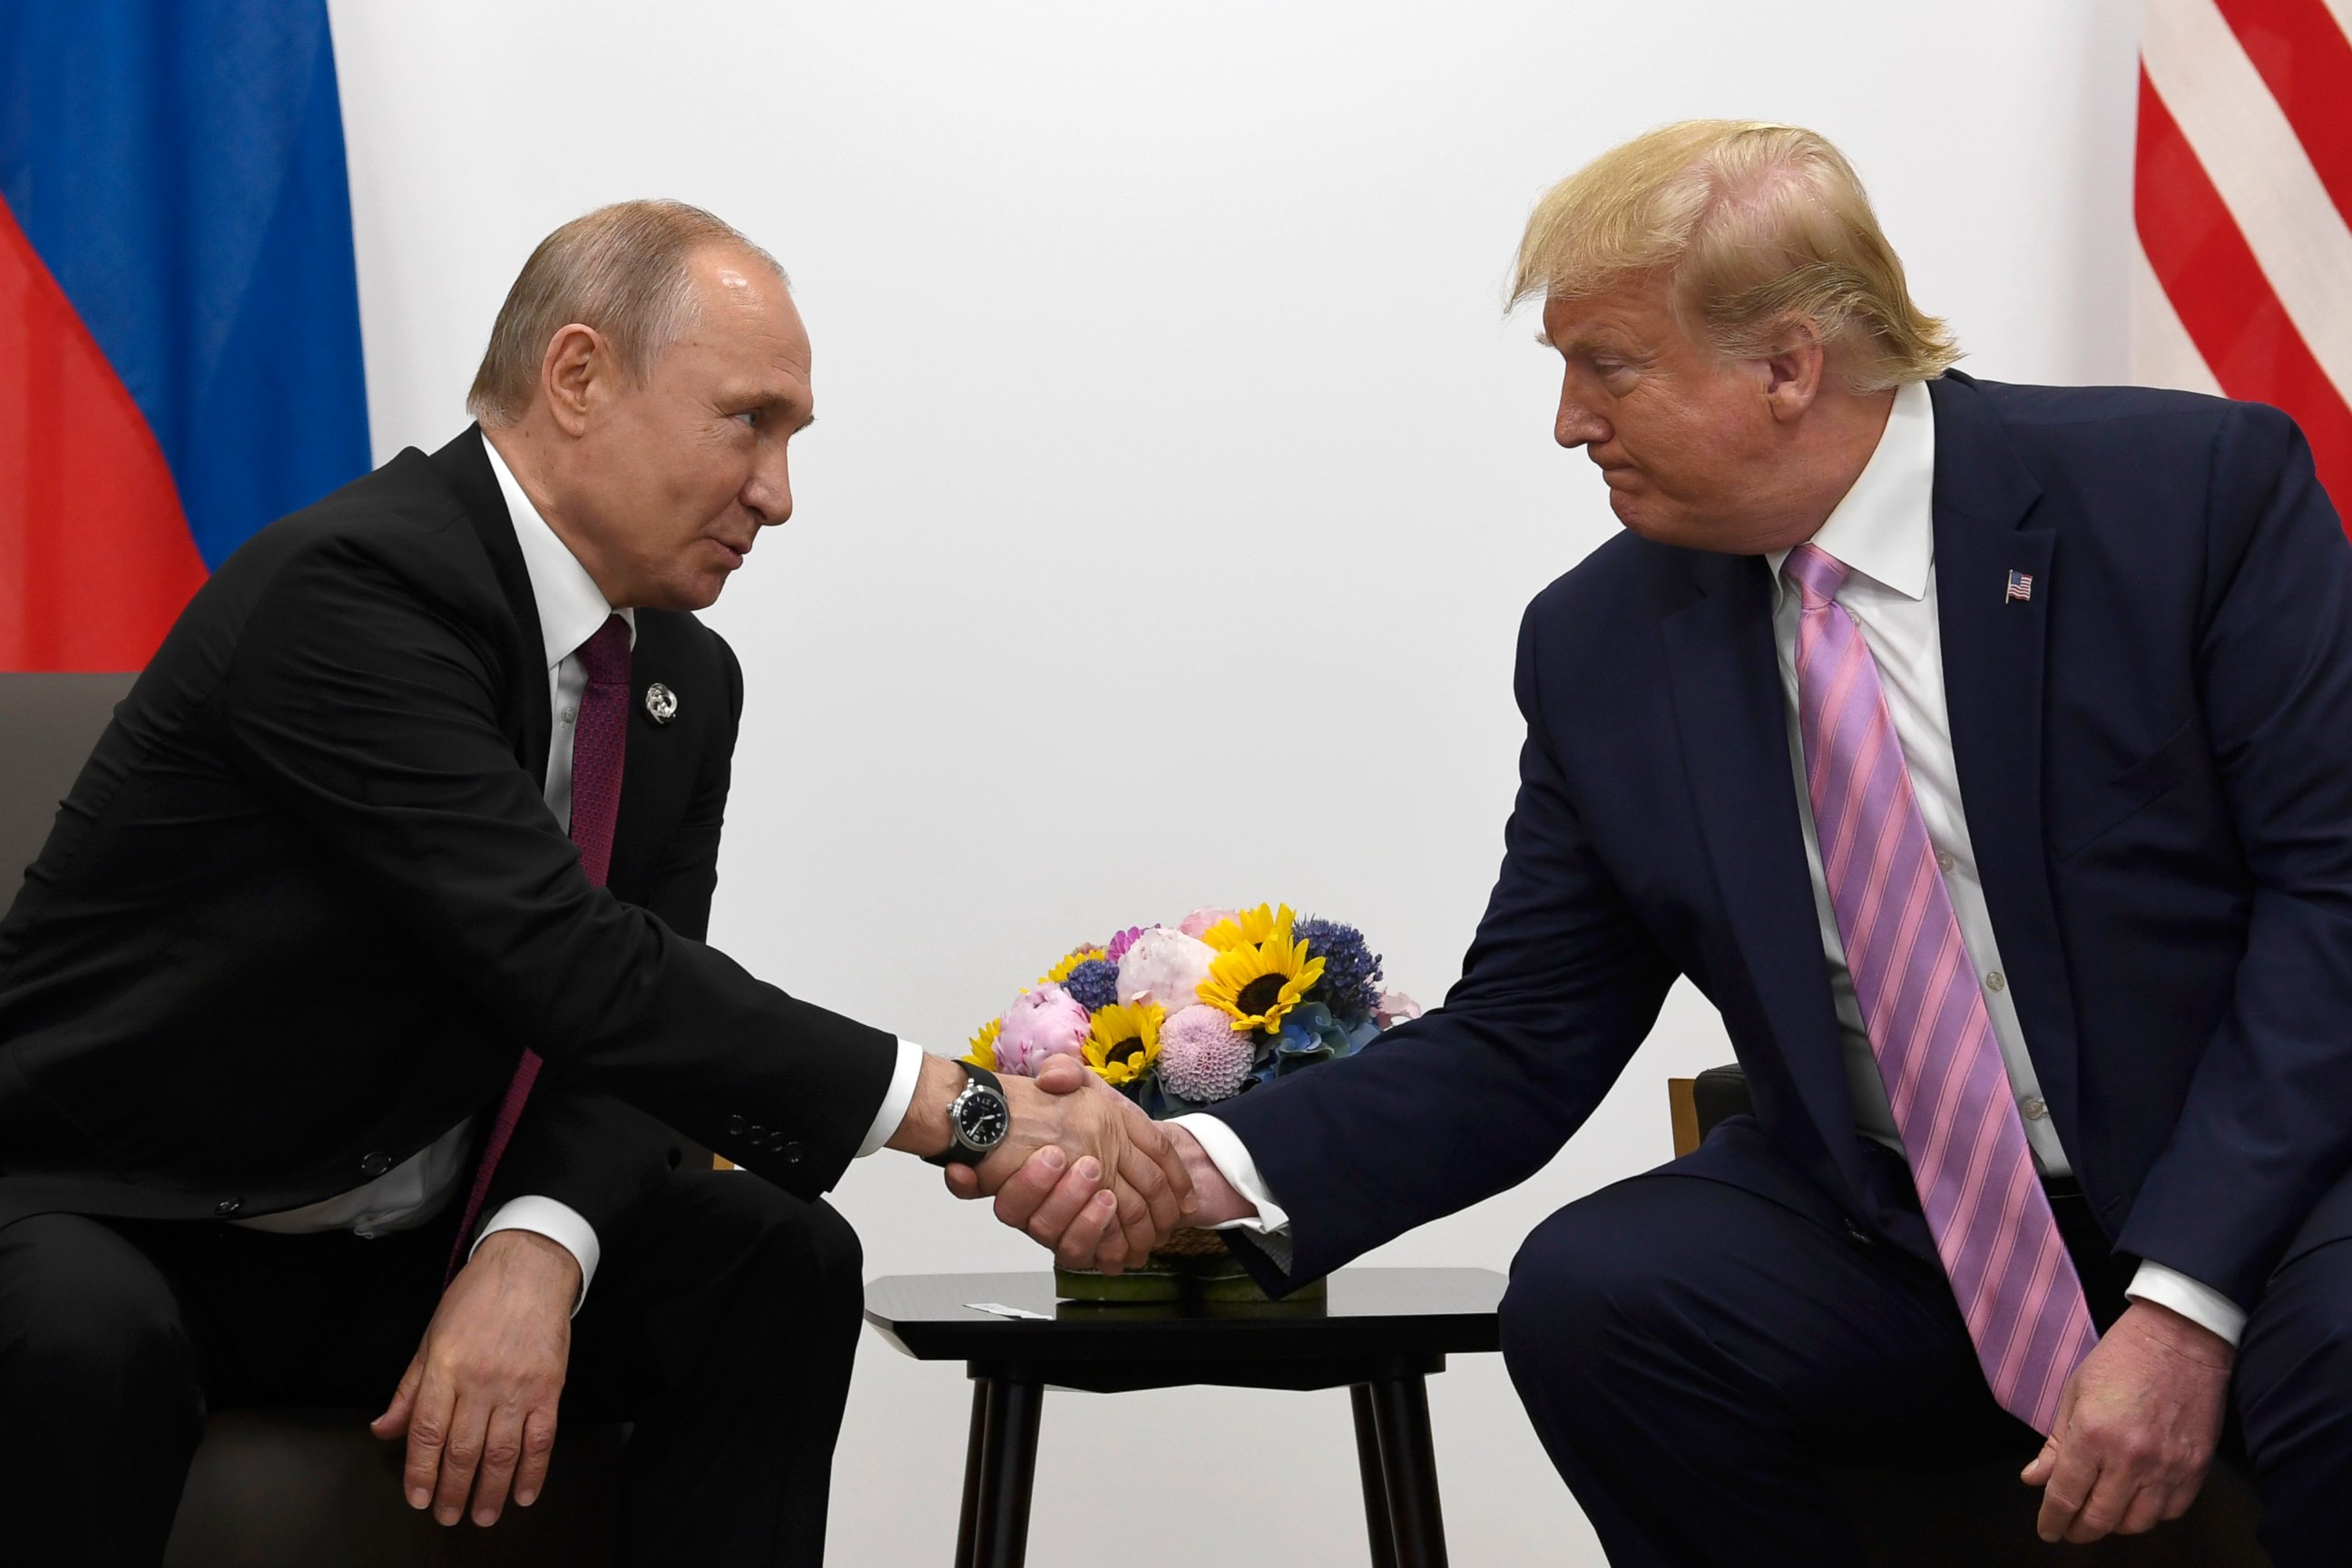 PHOTO: President Donald Trump, right, meets with Russian President Vladimir Putin during a bilateral meeting on the sidelines of the G-20 summit in Osaka, Japan, June 28, 2019.